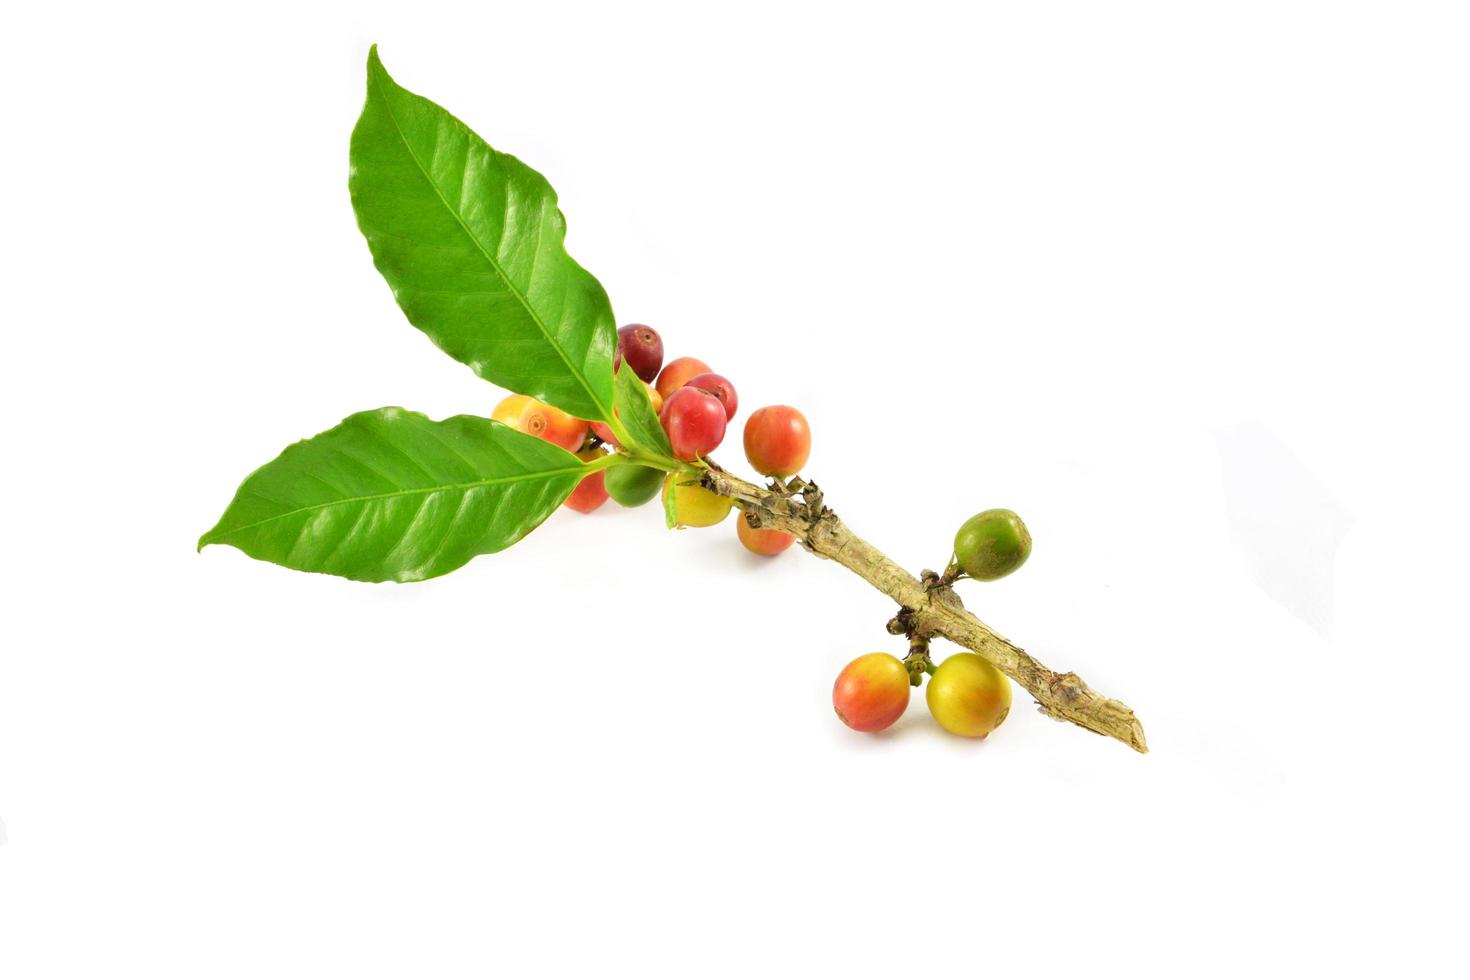 Fresh red green coffee beans and green leaf on branch isolated on white background photo